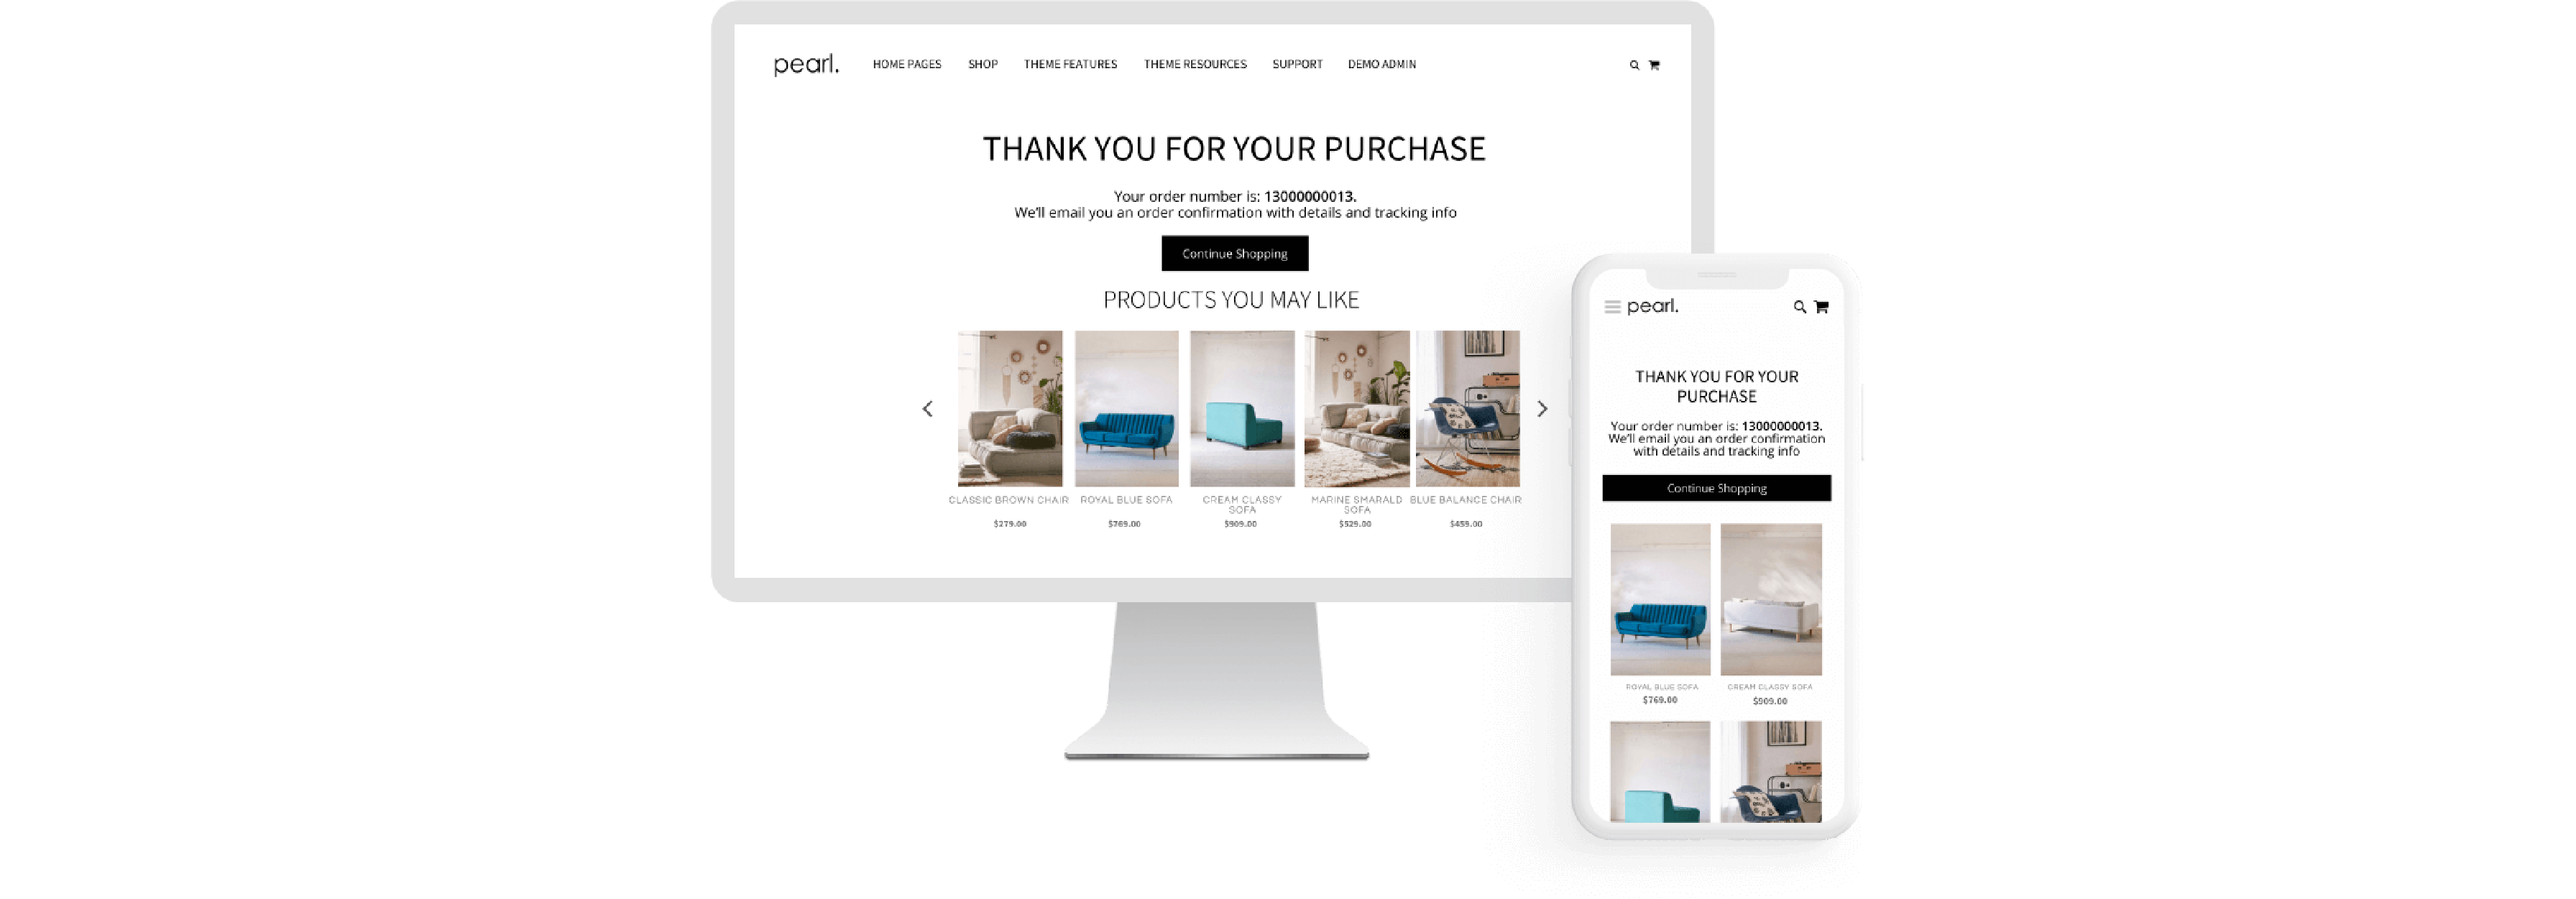 WeltPixel Extension for Magento 2 Checkout Success Page